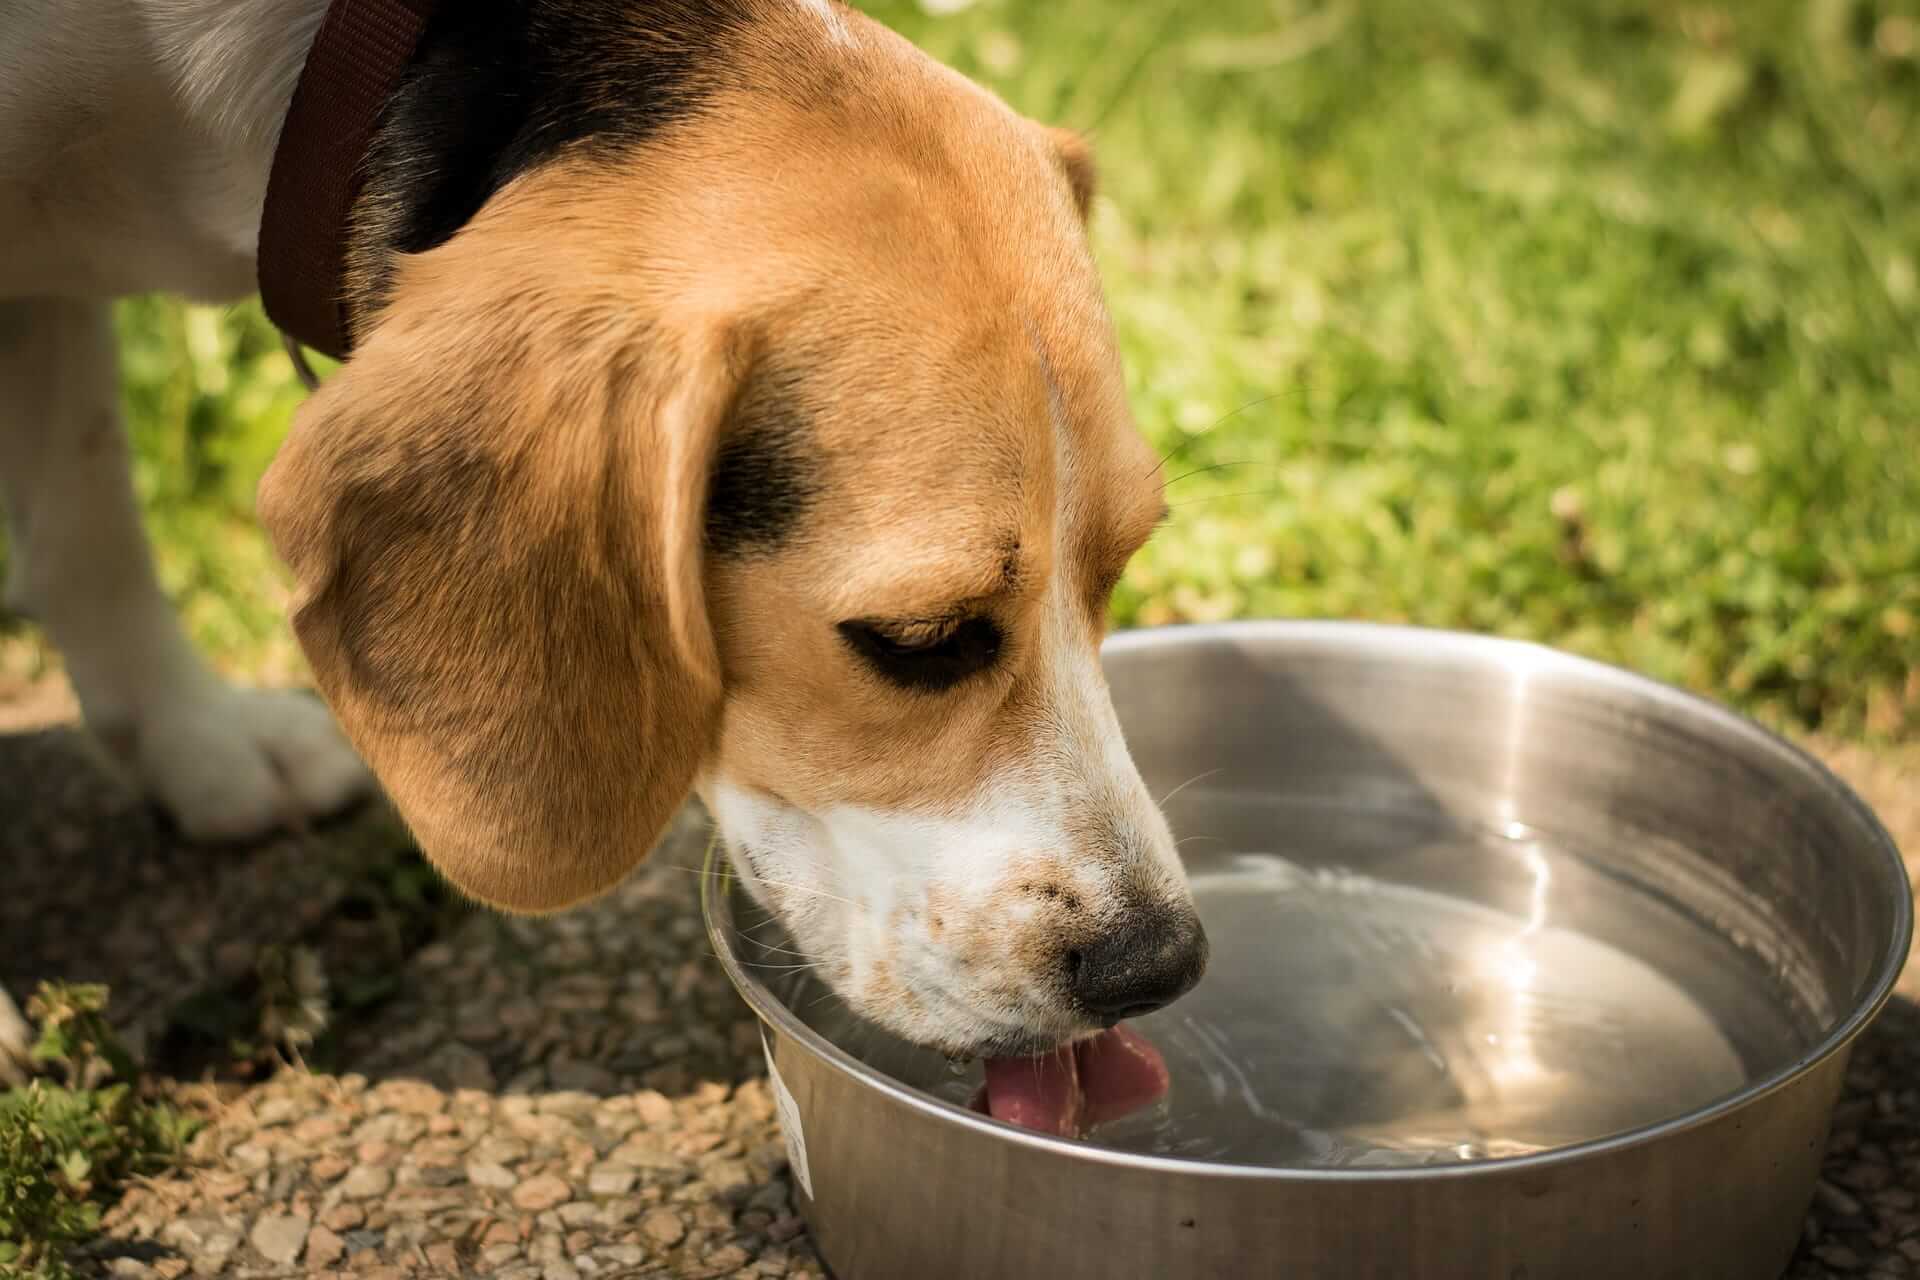 When can puppies drink from a bowl?